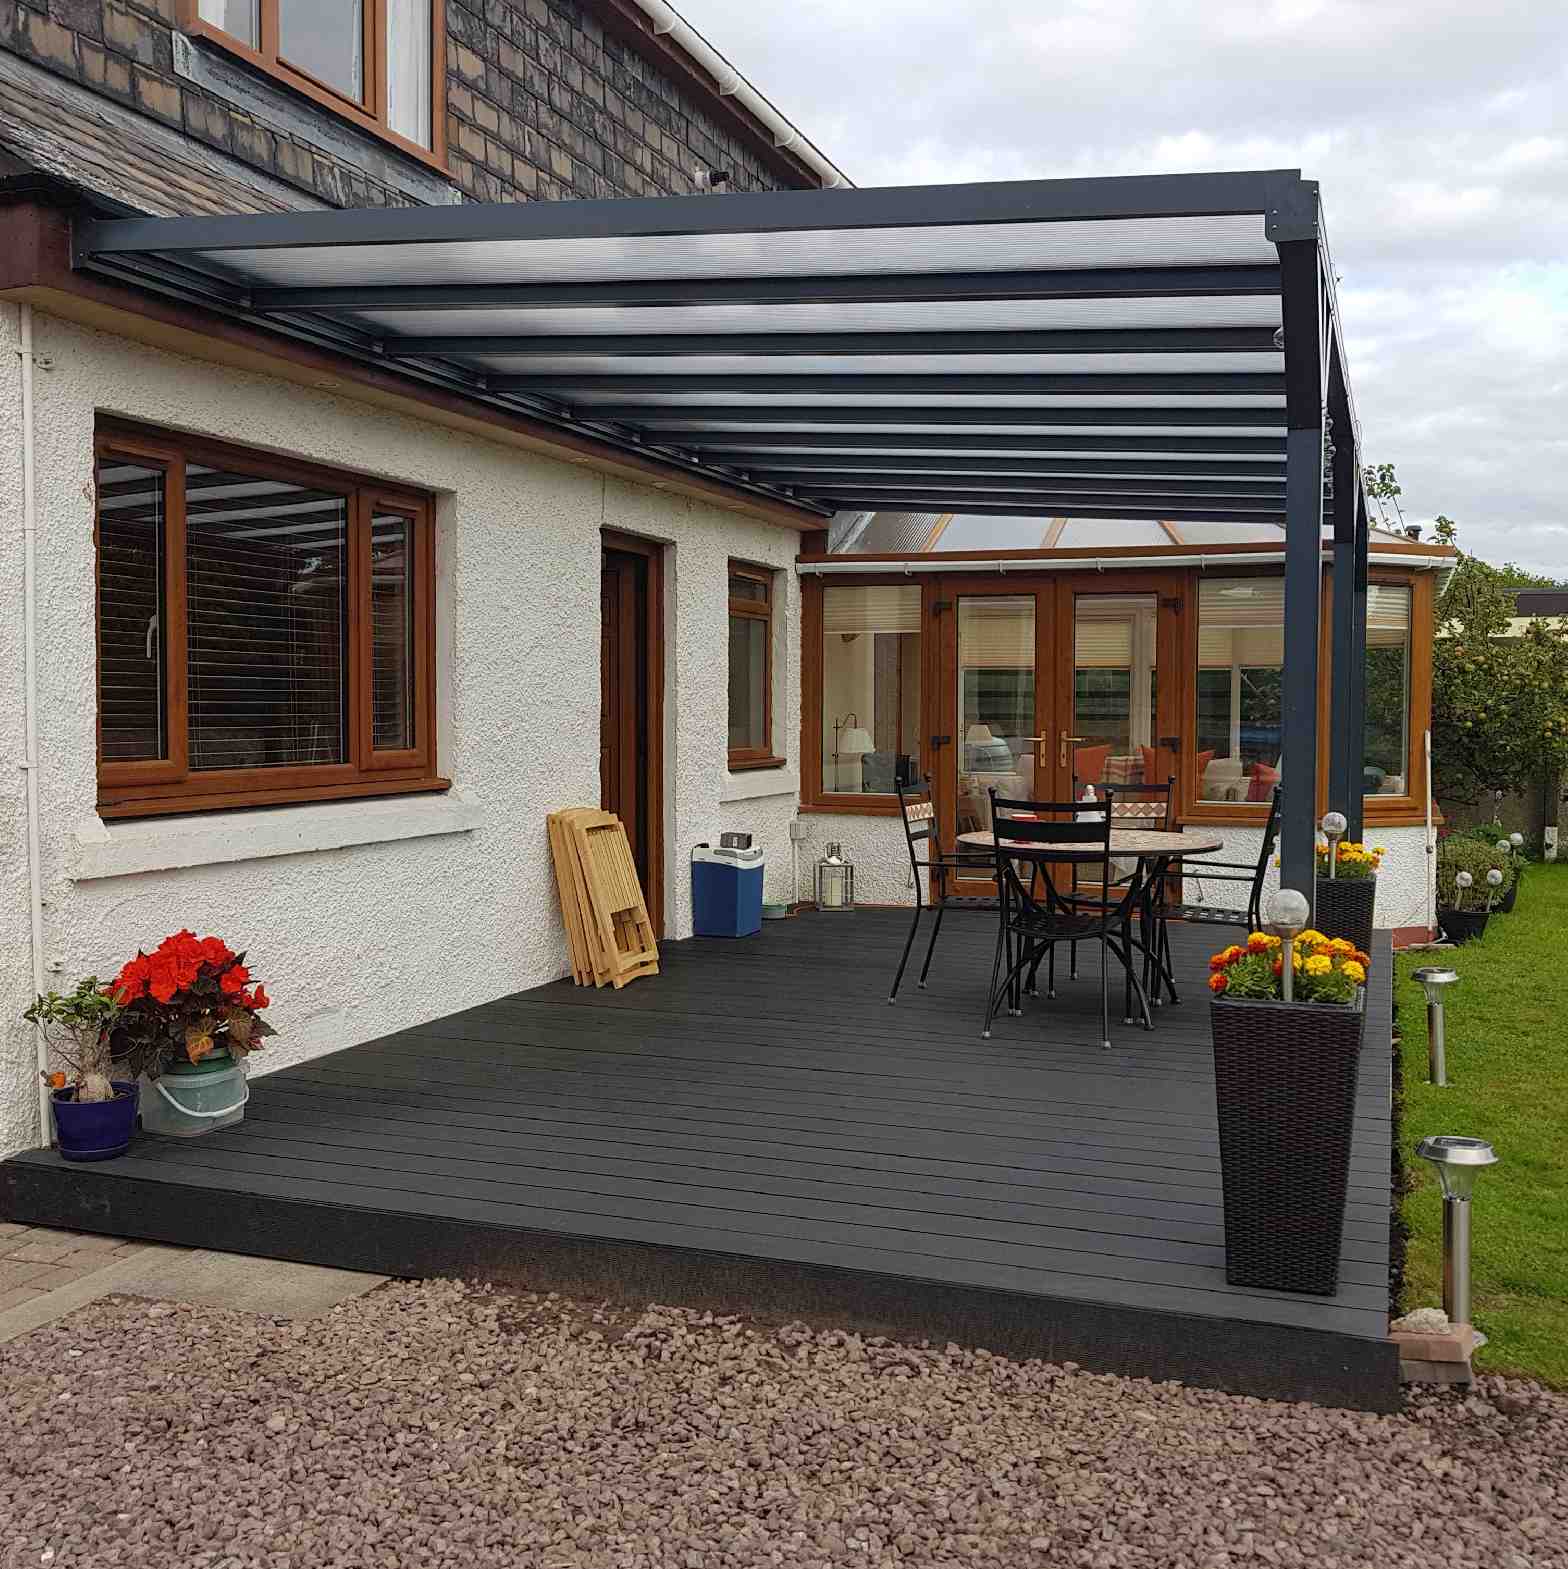 Buy Omega Verandah, Anthracite Grey, 16mm Polycarbonate Glazing - 8.4m (W) x 4.0m (P), (4) Supporting Posts online today